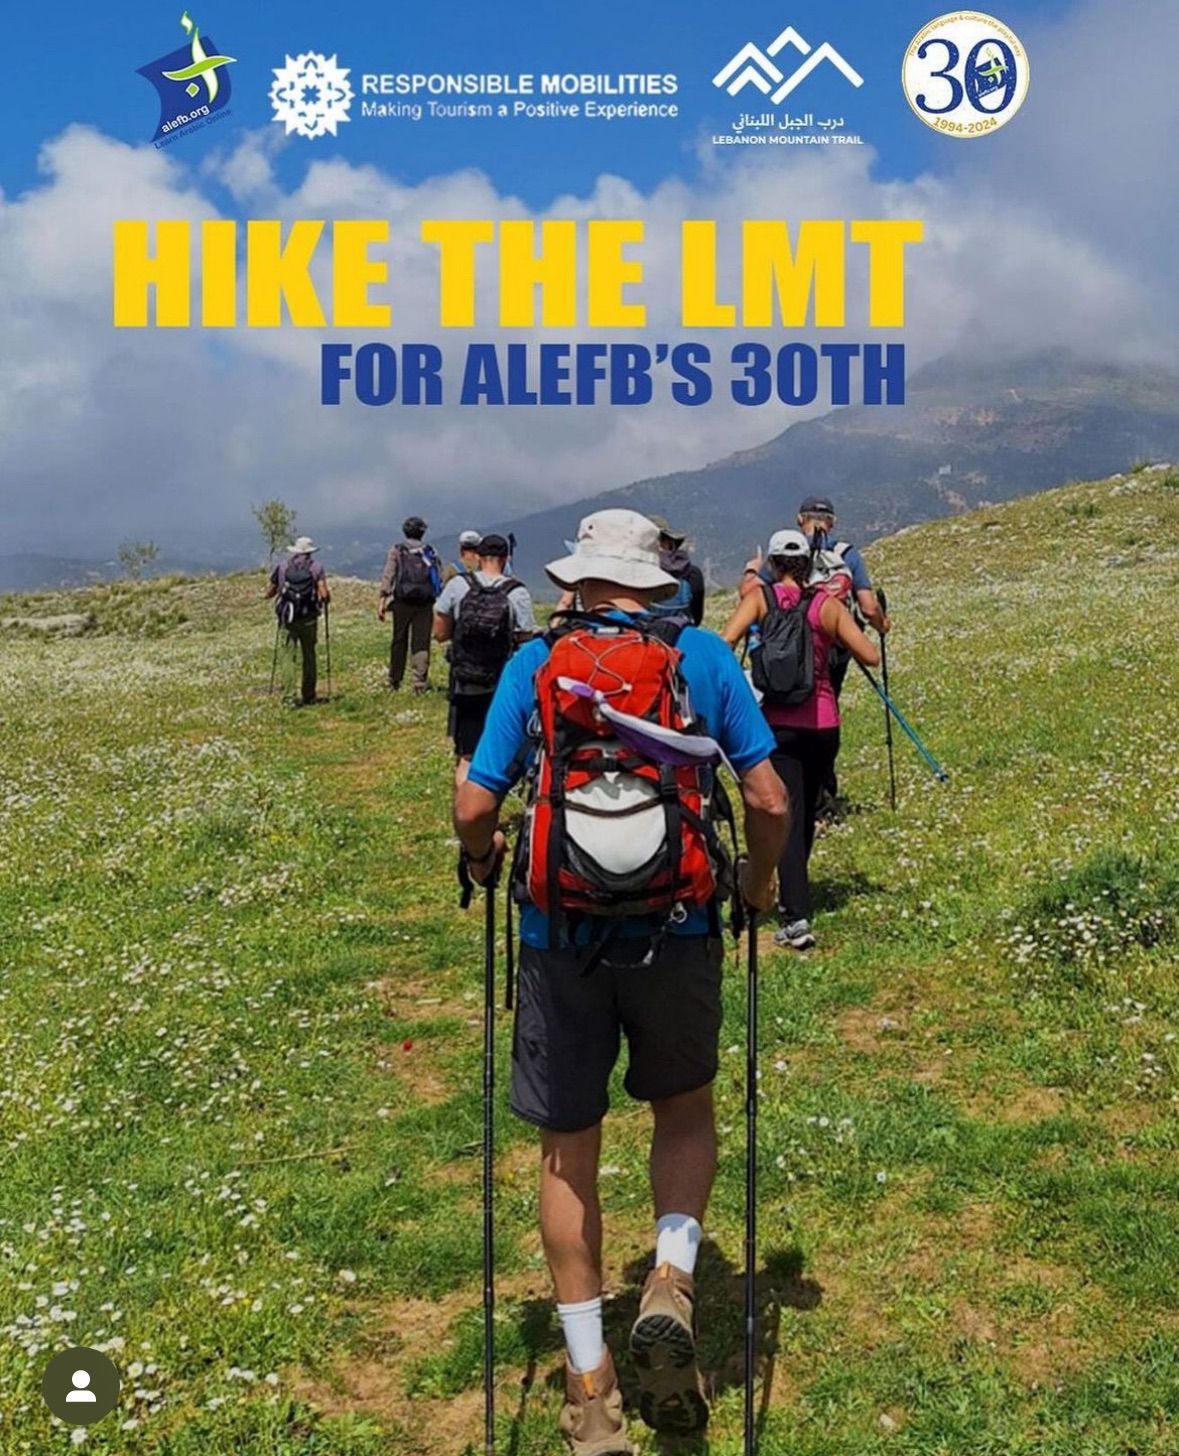 Hike the LMT for Alefb\u2019s 30th - August 22